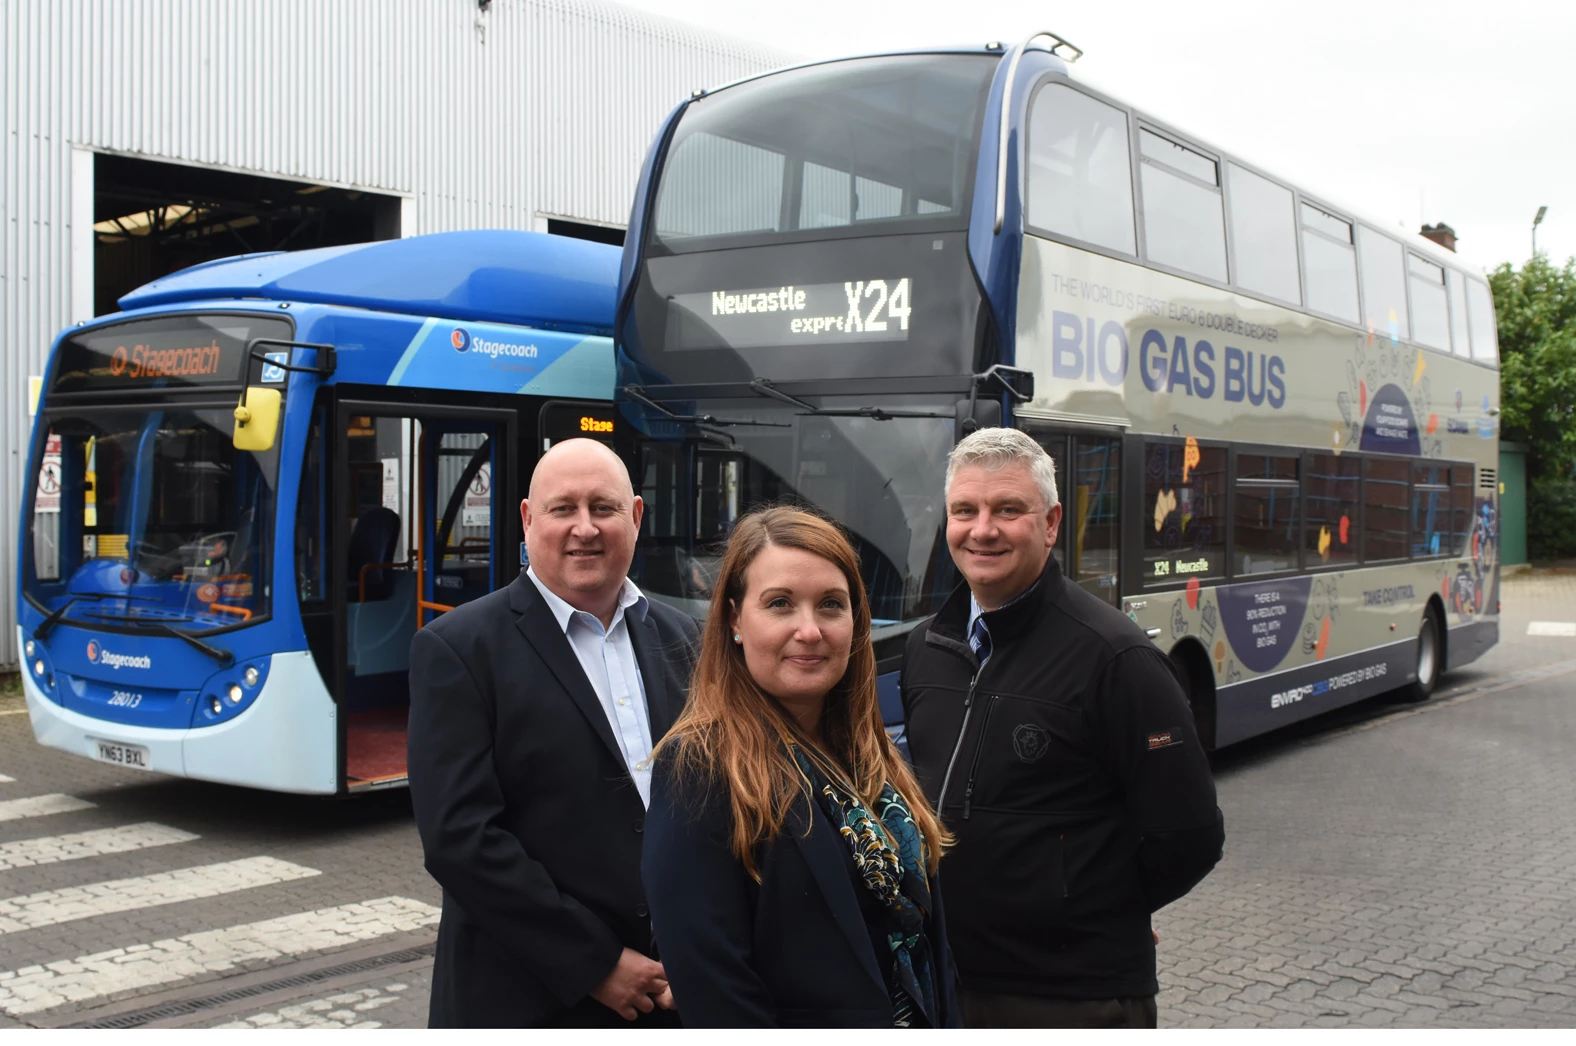 Left to right: Gary Chisholm, Engineering Director, Stagecoach North East, Mark Oliver, UK Bus & Coach Fleet Sales General Manager and Tanya Neech, Senior Advisor for Sustainable Fuels at Scania